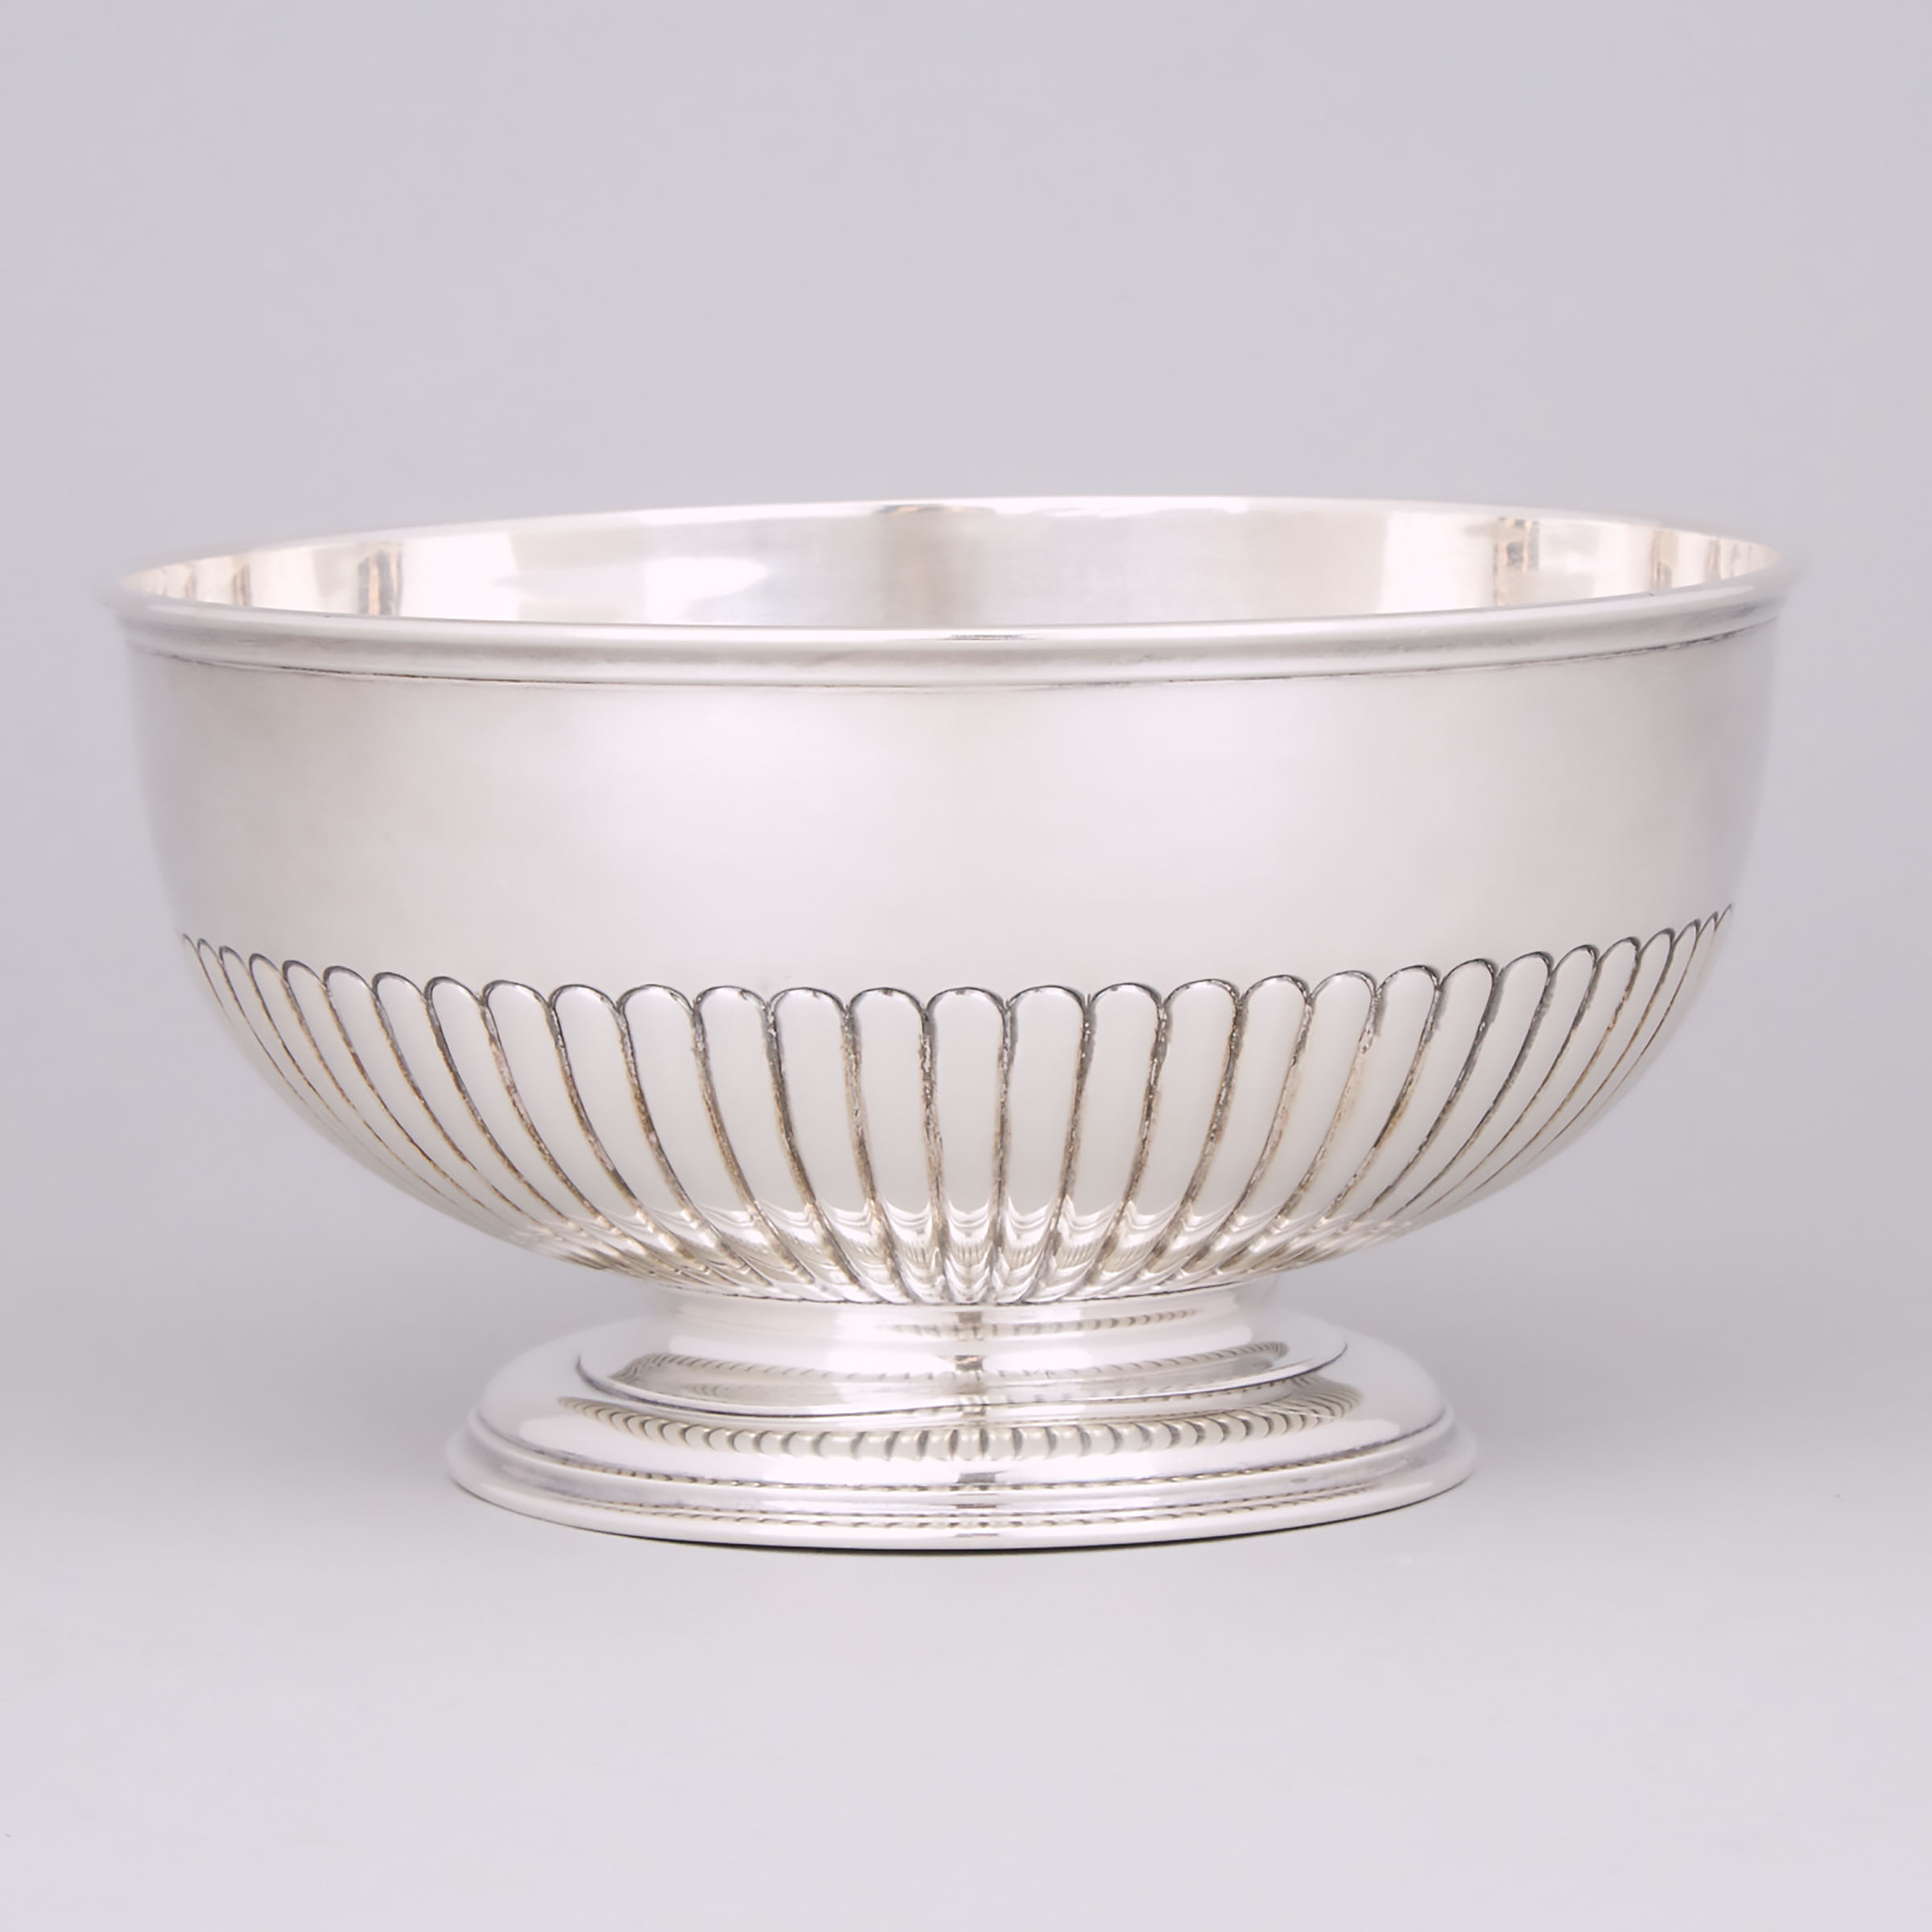 Canadian Silver Bowl, Henry Birks & Sons, Montreal, Que., 1935